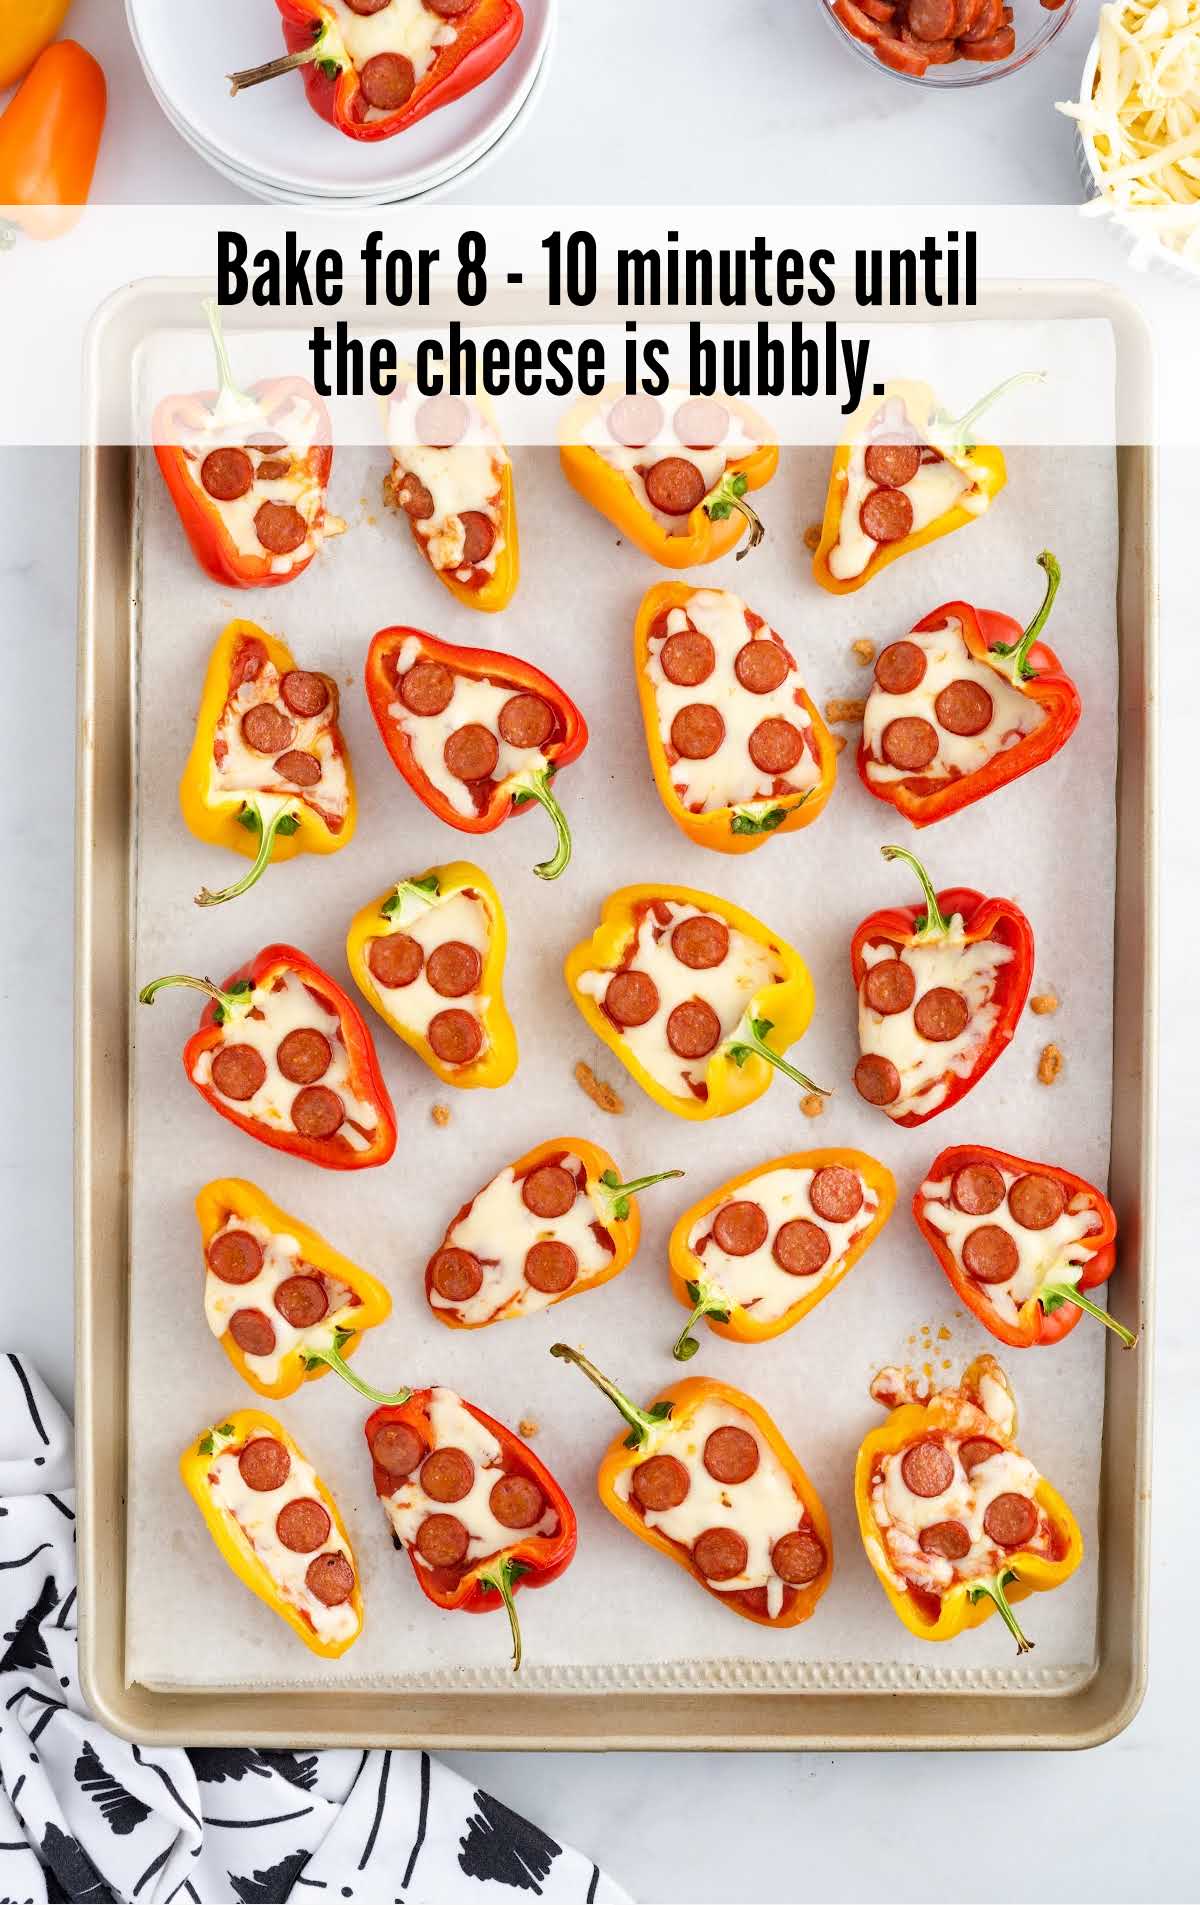 A tray of food on a plate, with Pizza bites